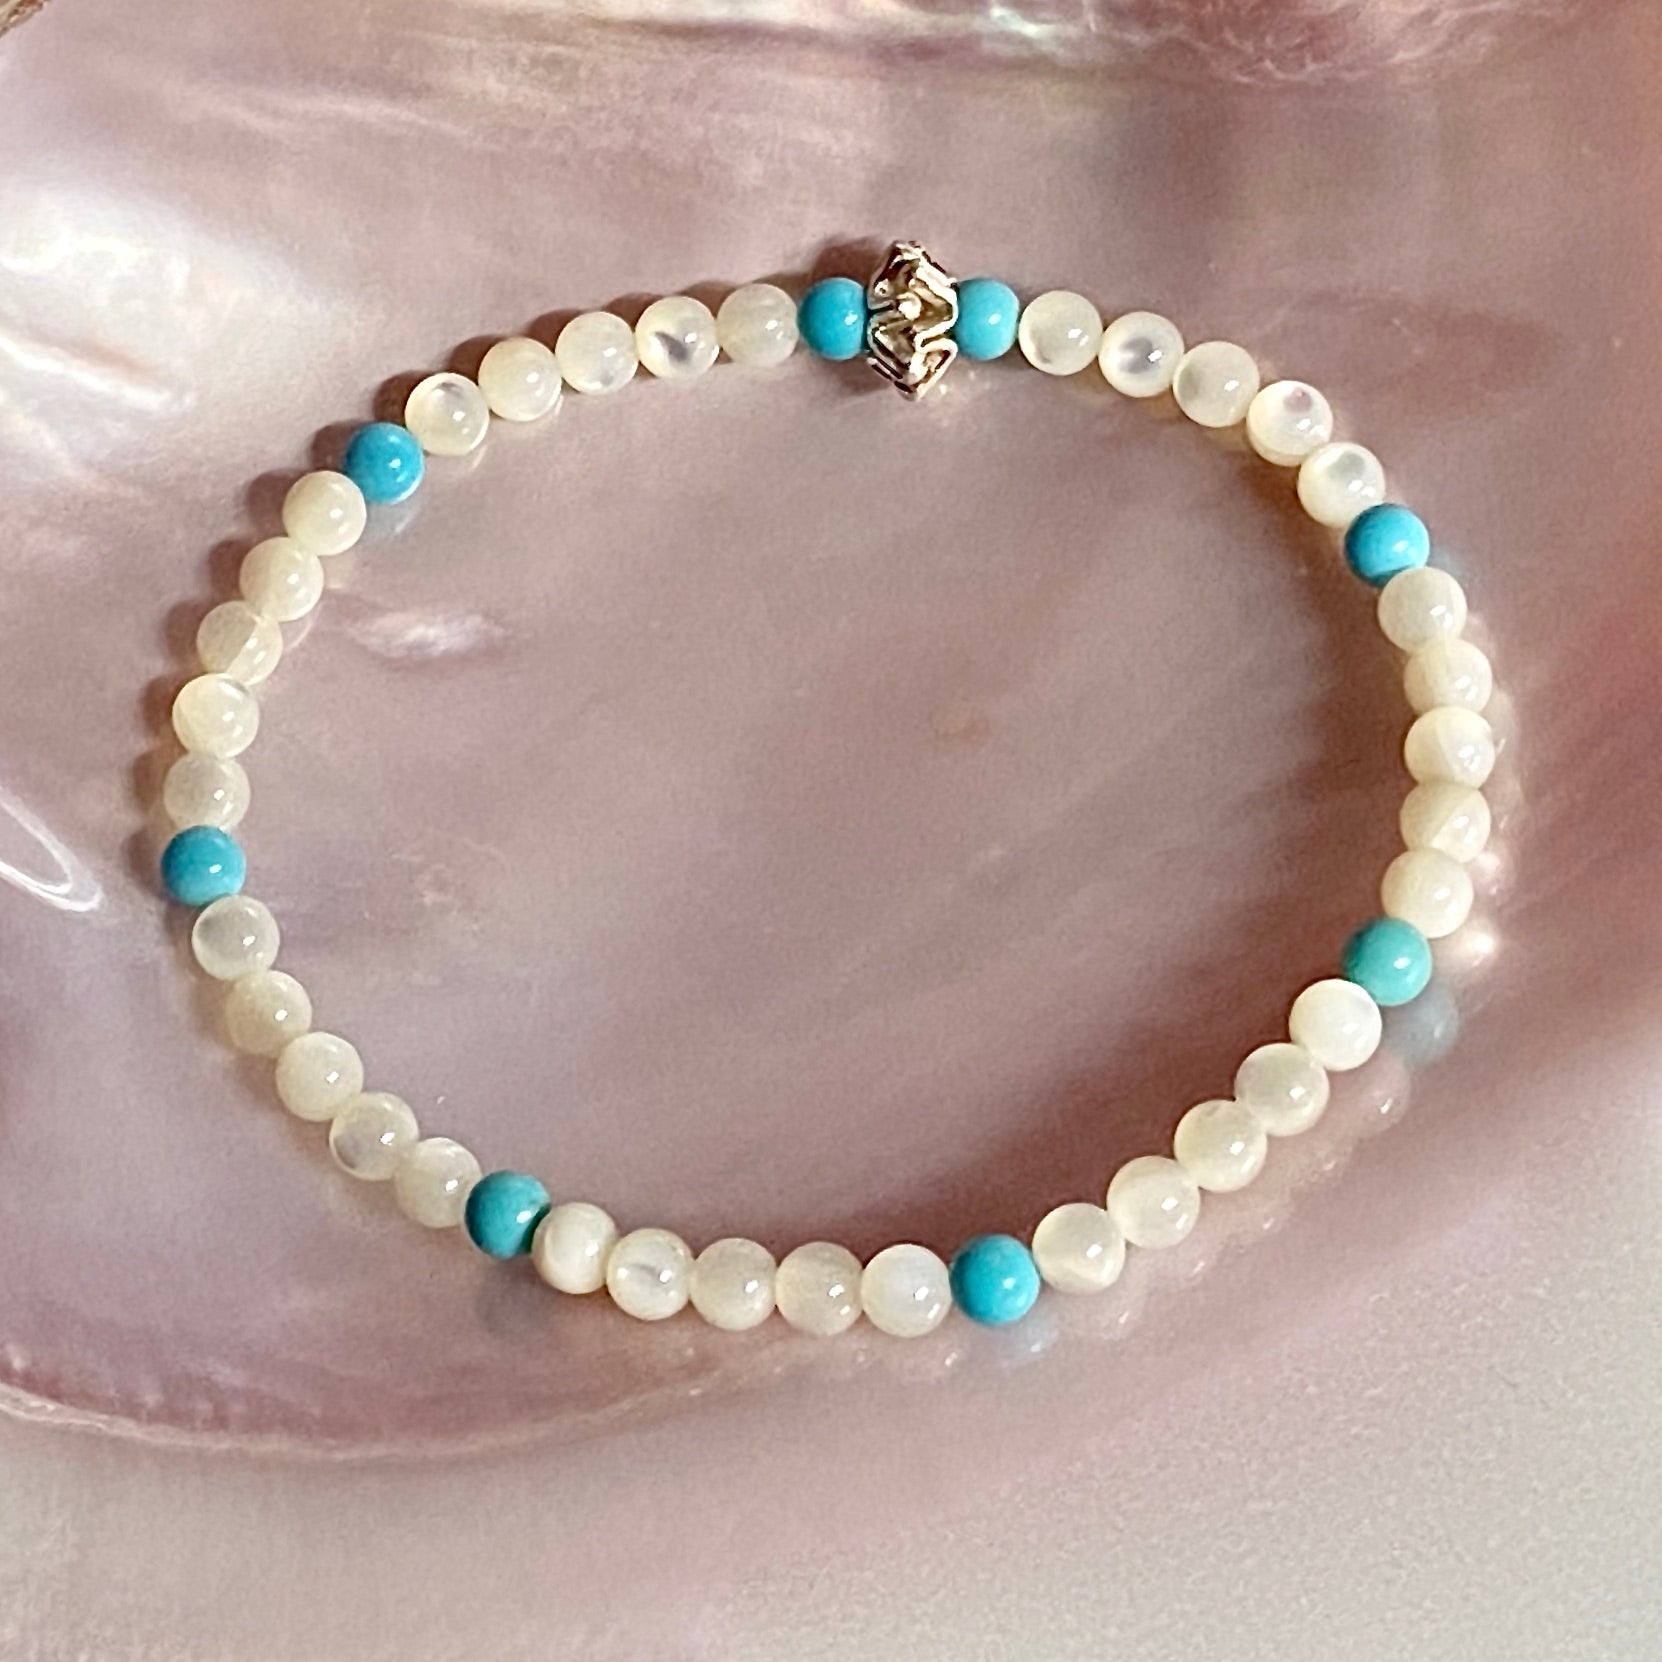 Between the Cominos white mother of pearl & sleeping beauty turquoise beachlove stretch bracelet by Kimberly Arpaia